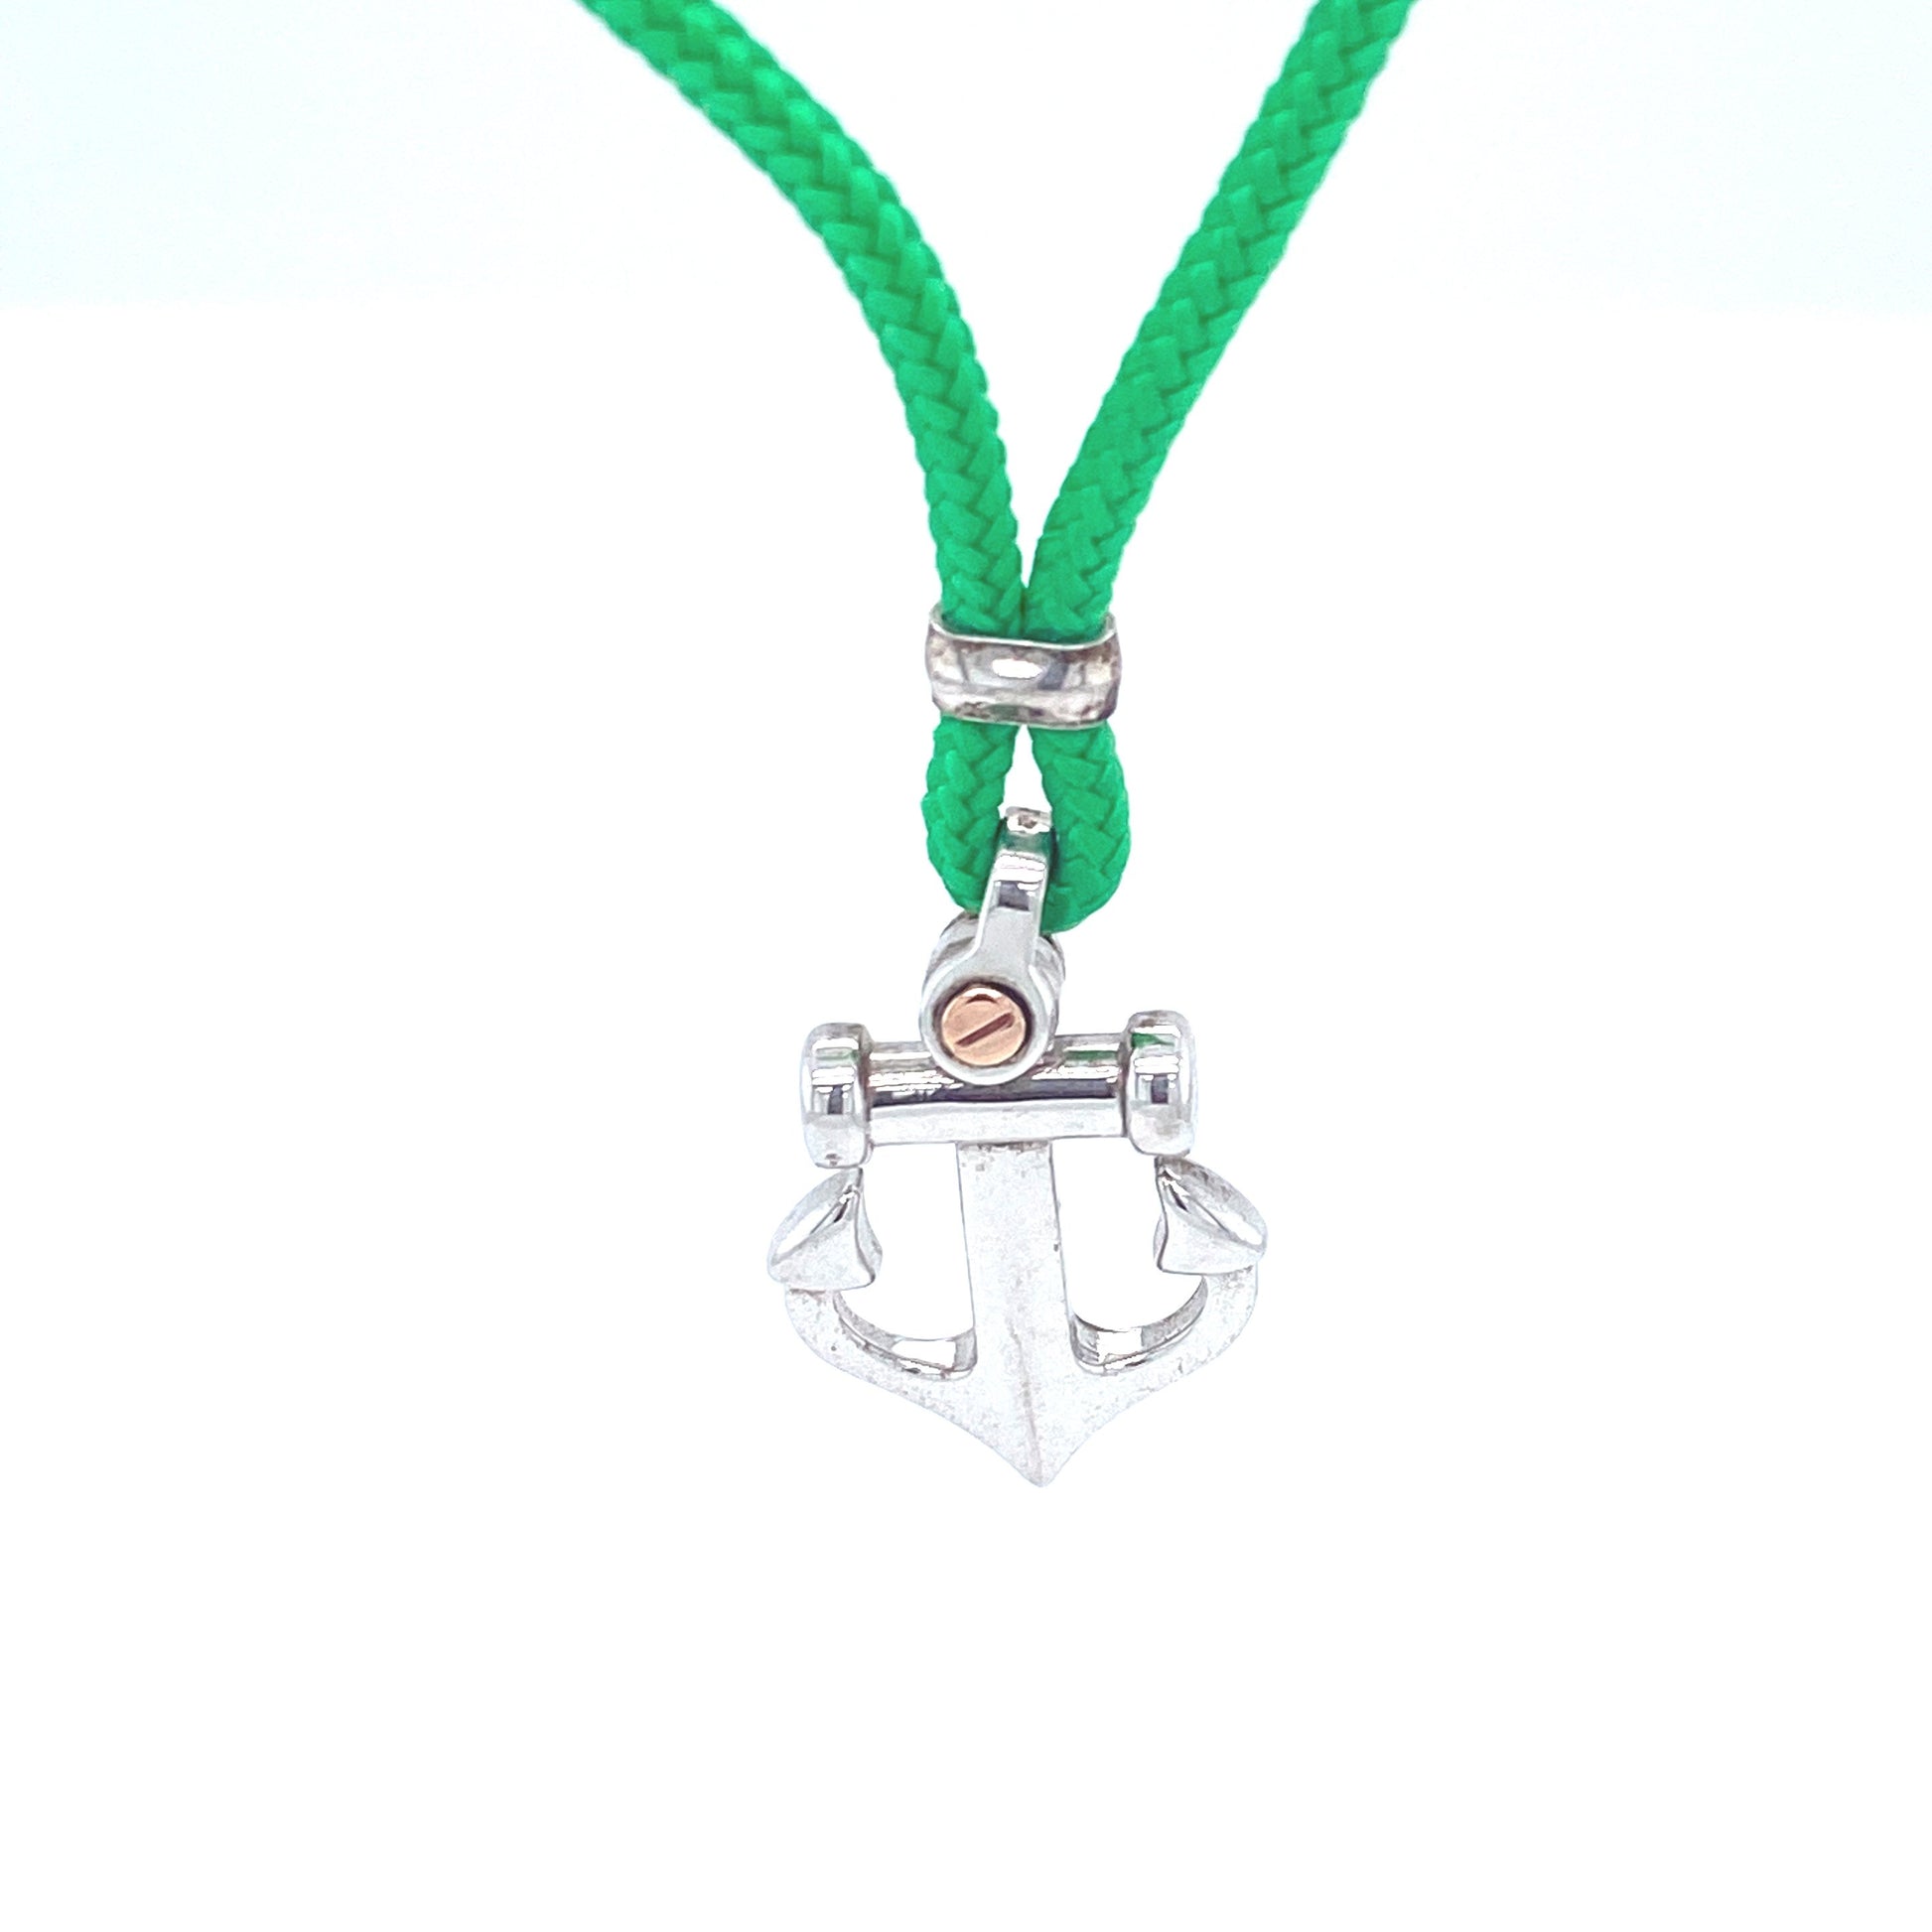 Anchor Pendant with Kevlar Necklace | Zancan | Luby 